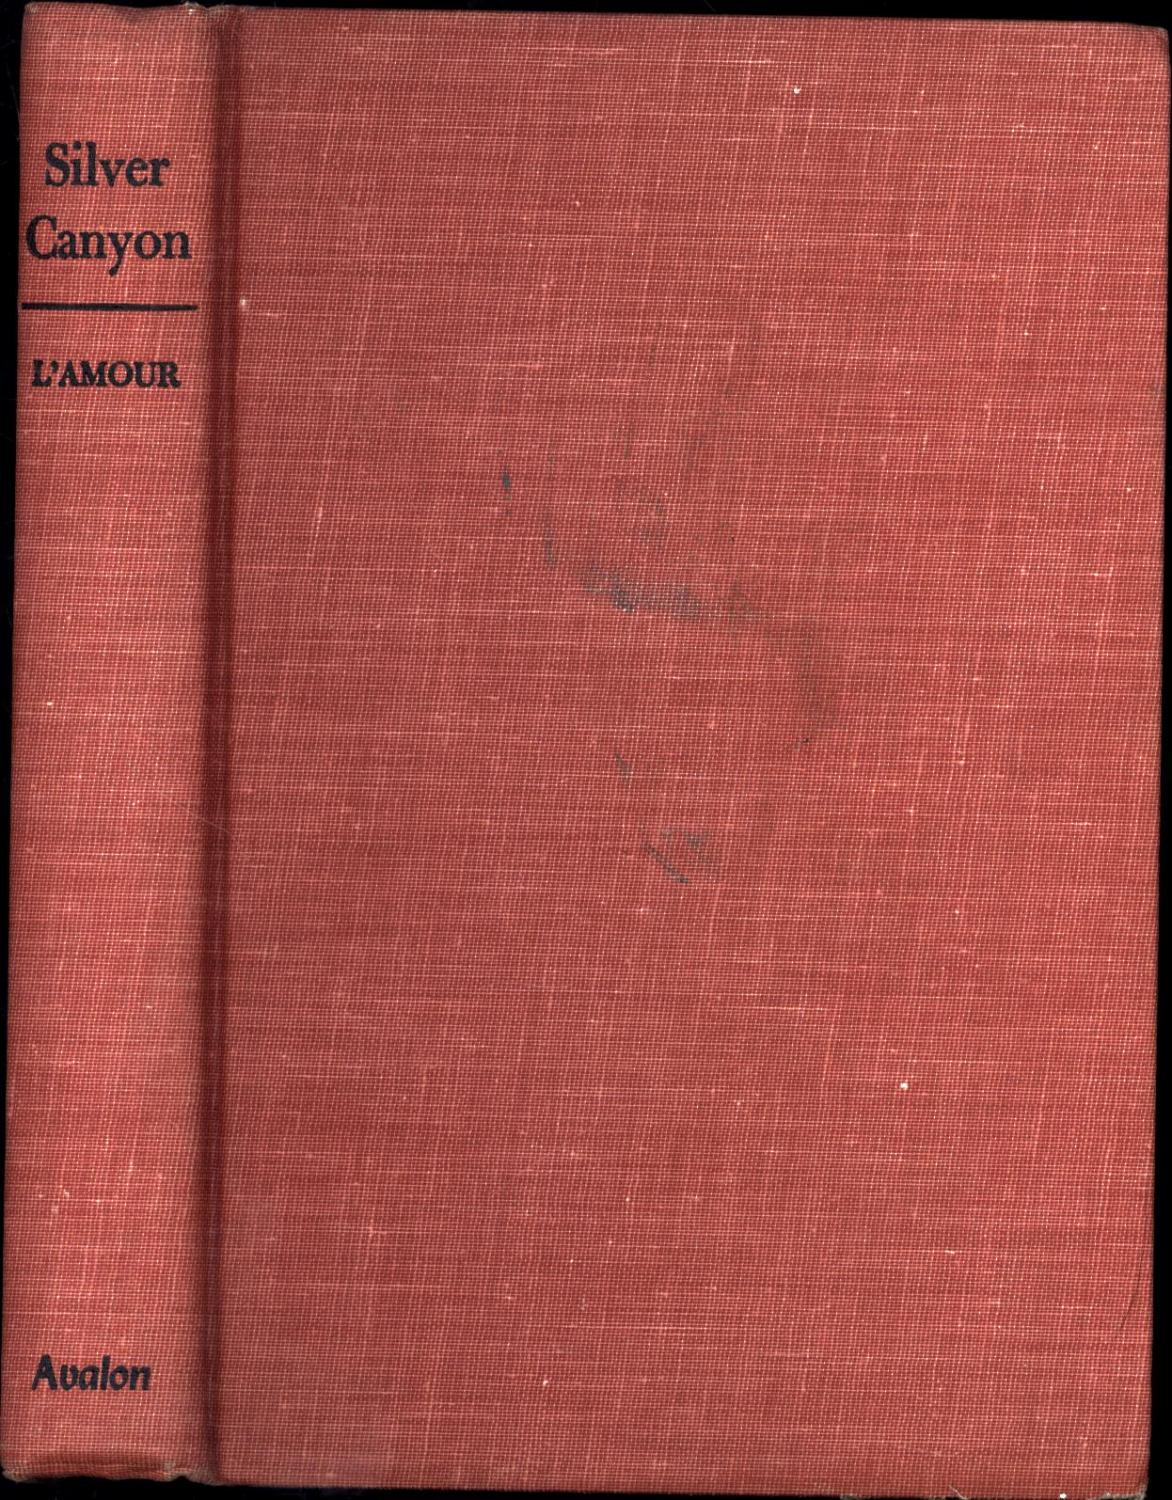 Silver Canyon by Louis L'Amour, Hardcover